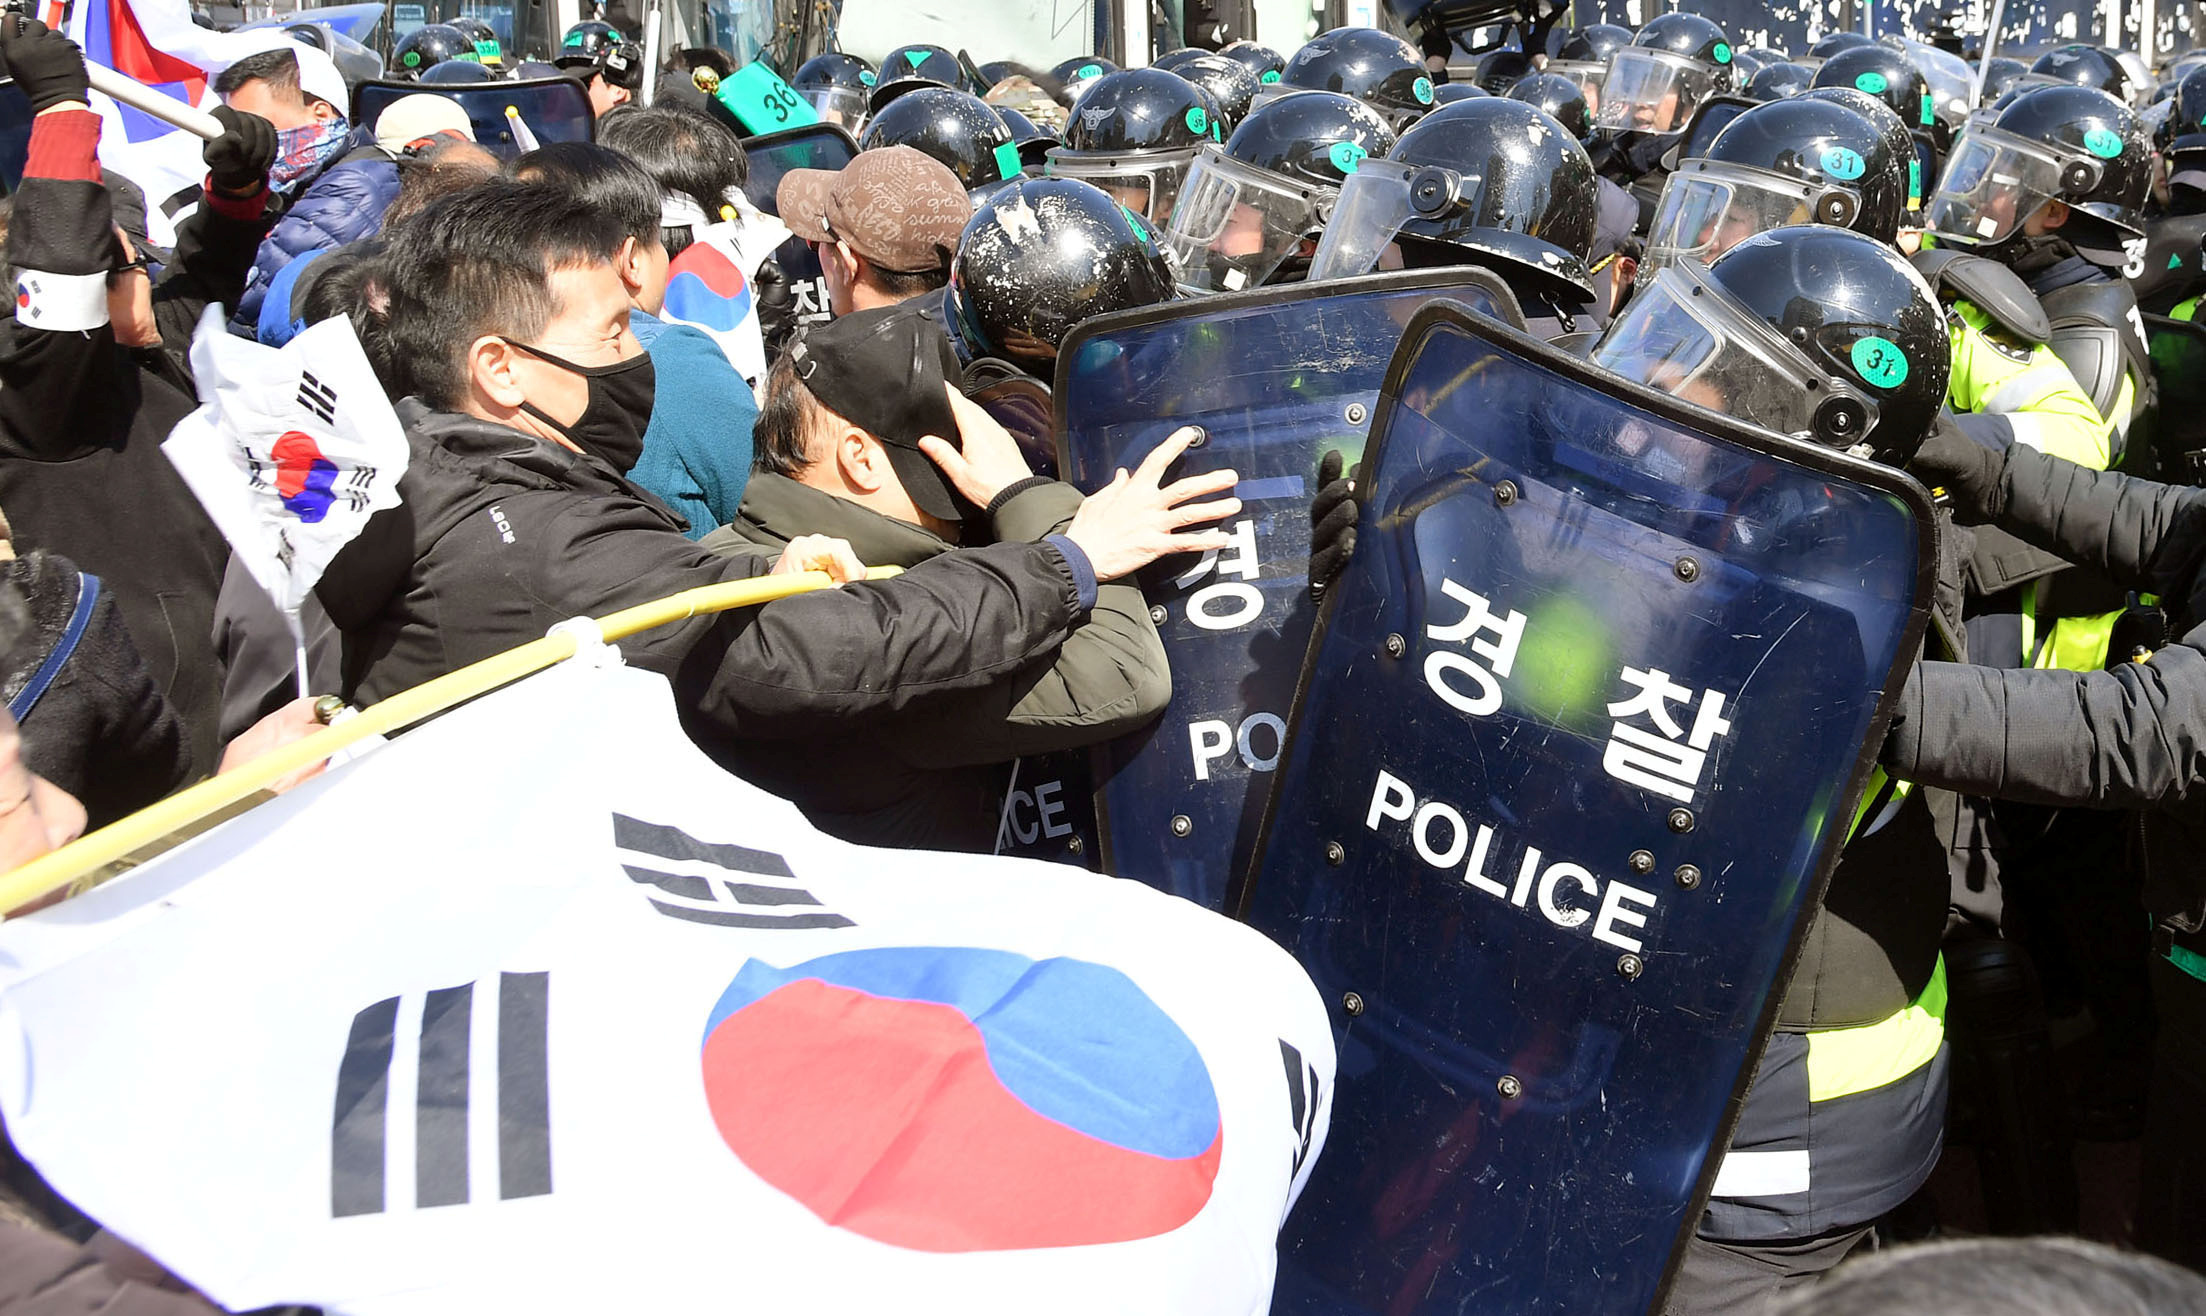 Protesters supporting South Korean President Park Geun-hye clash with riot policemen near the Constitutional Court in Seoul, South Korea, on March 10, 2017. (Kyodo/Reuters)